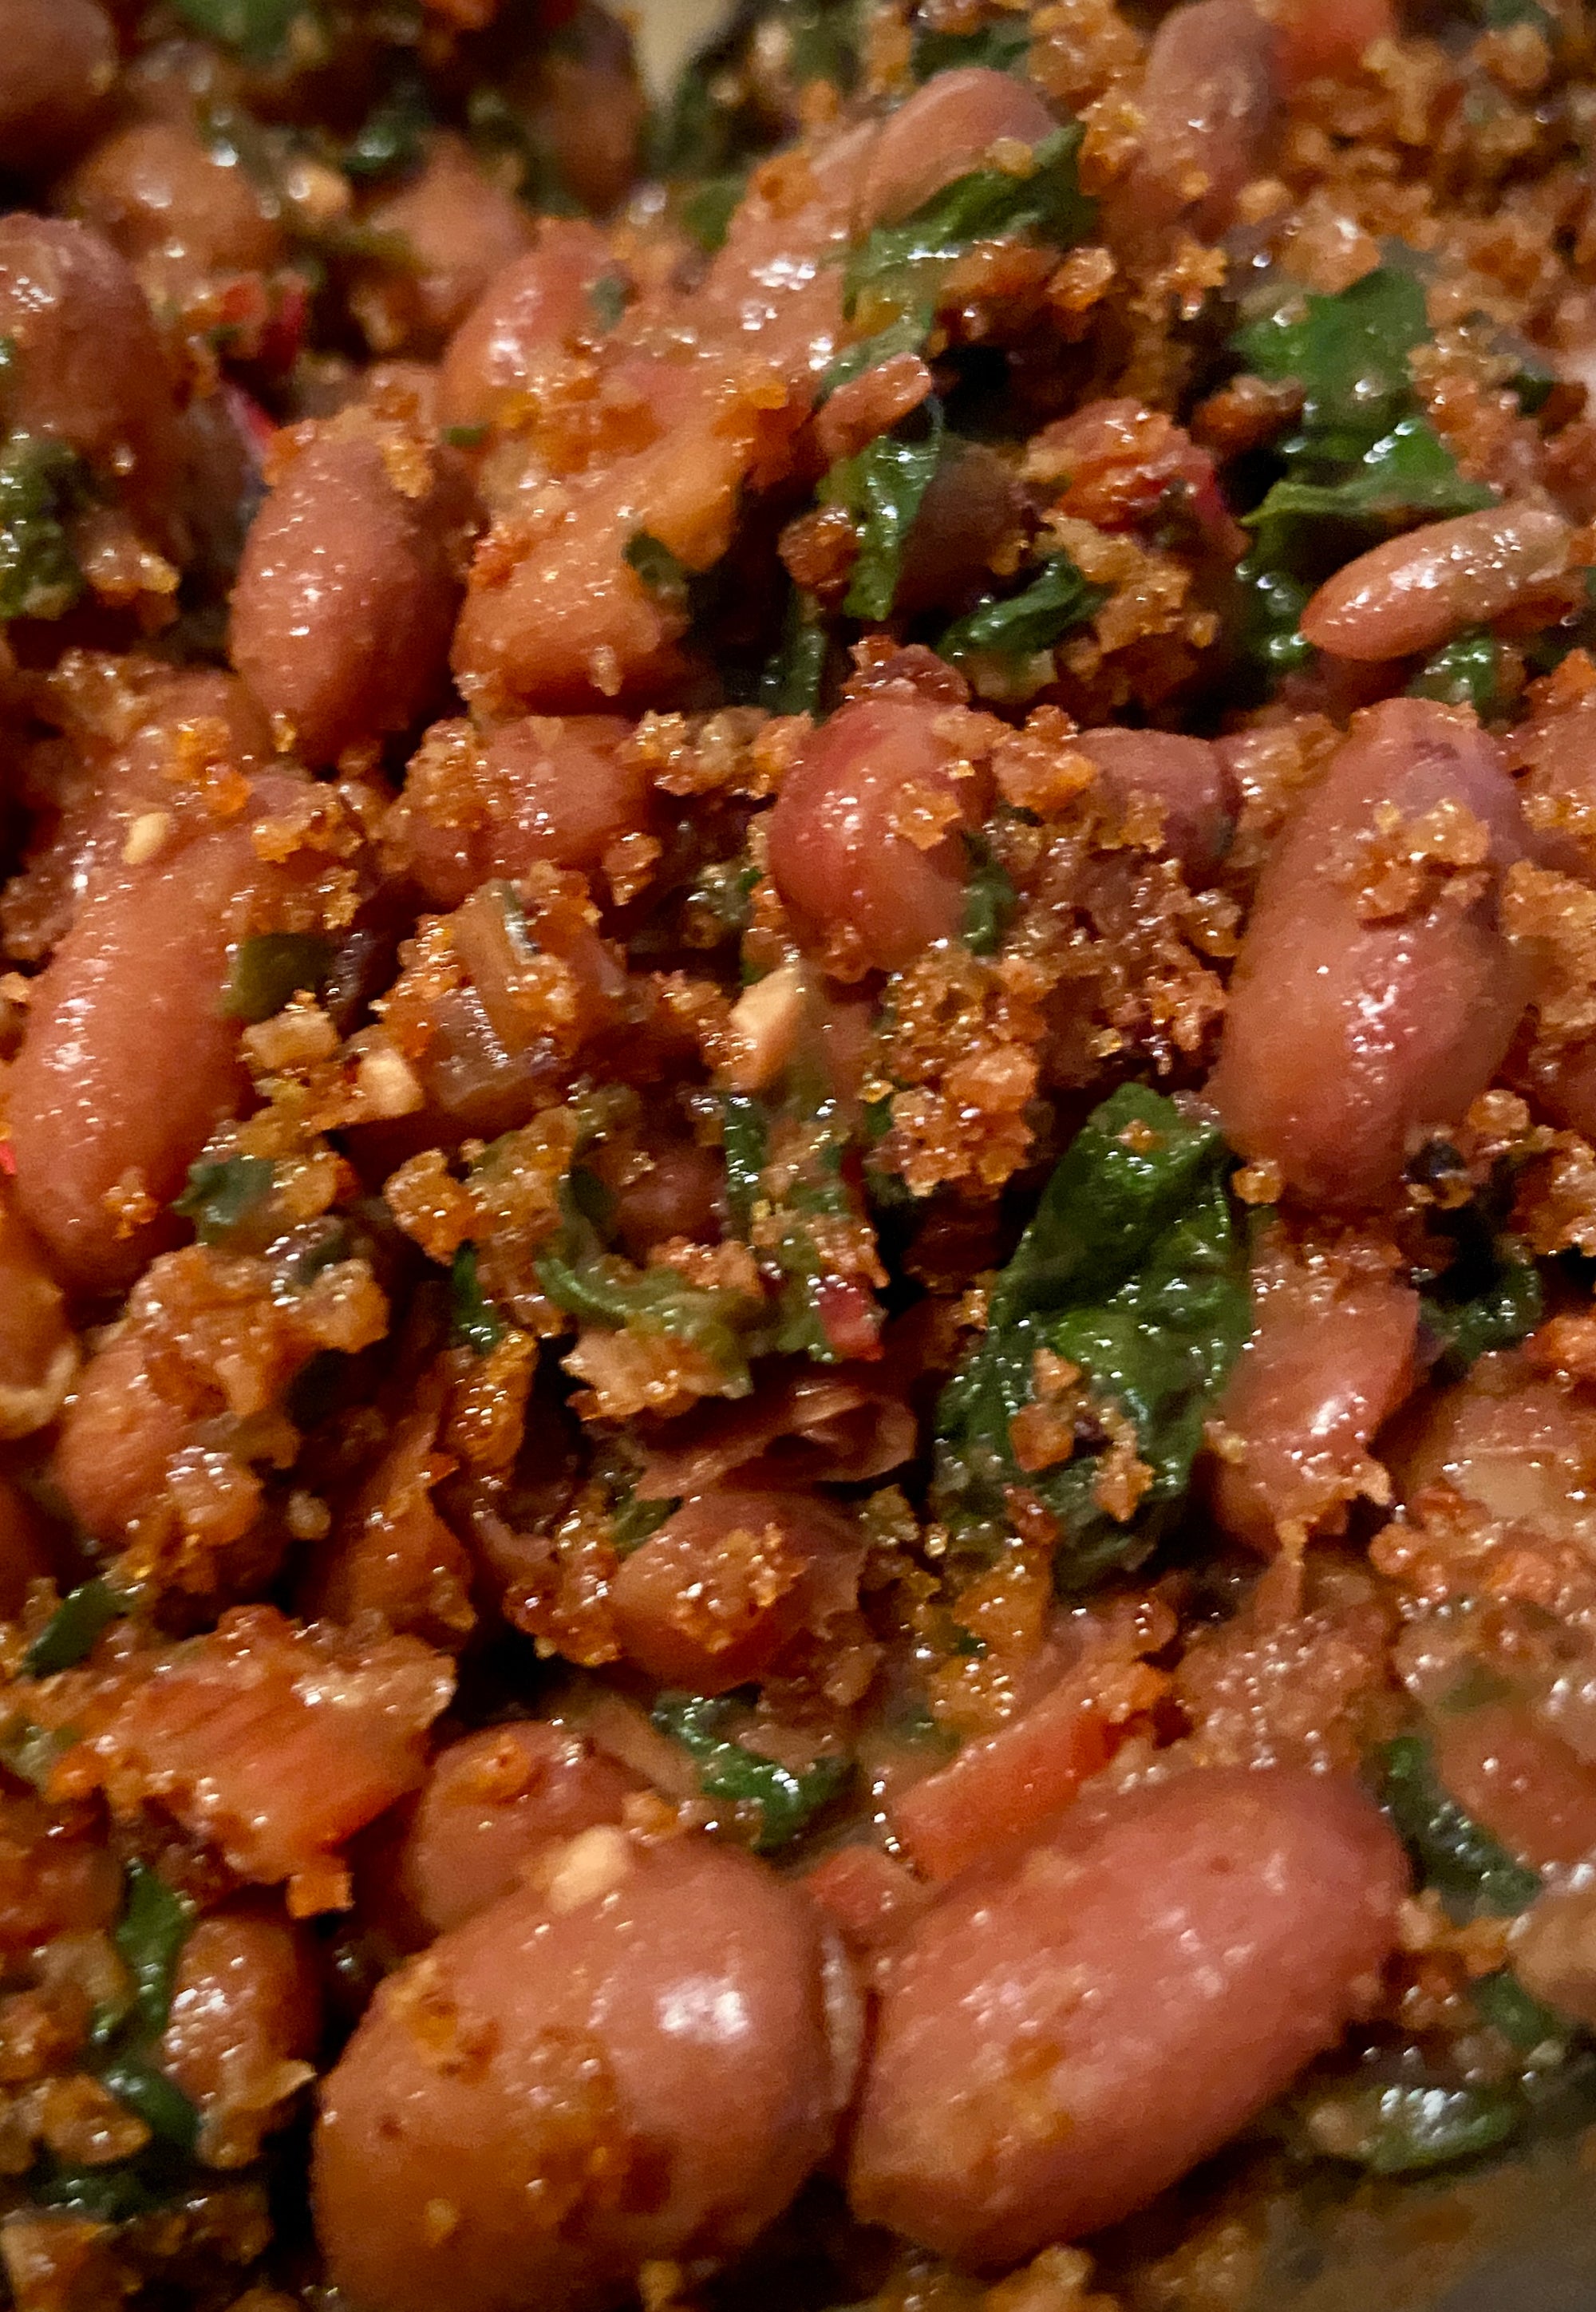 Beans and Chard with Toasted Bread Crumbs